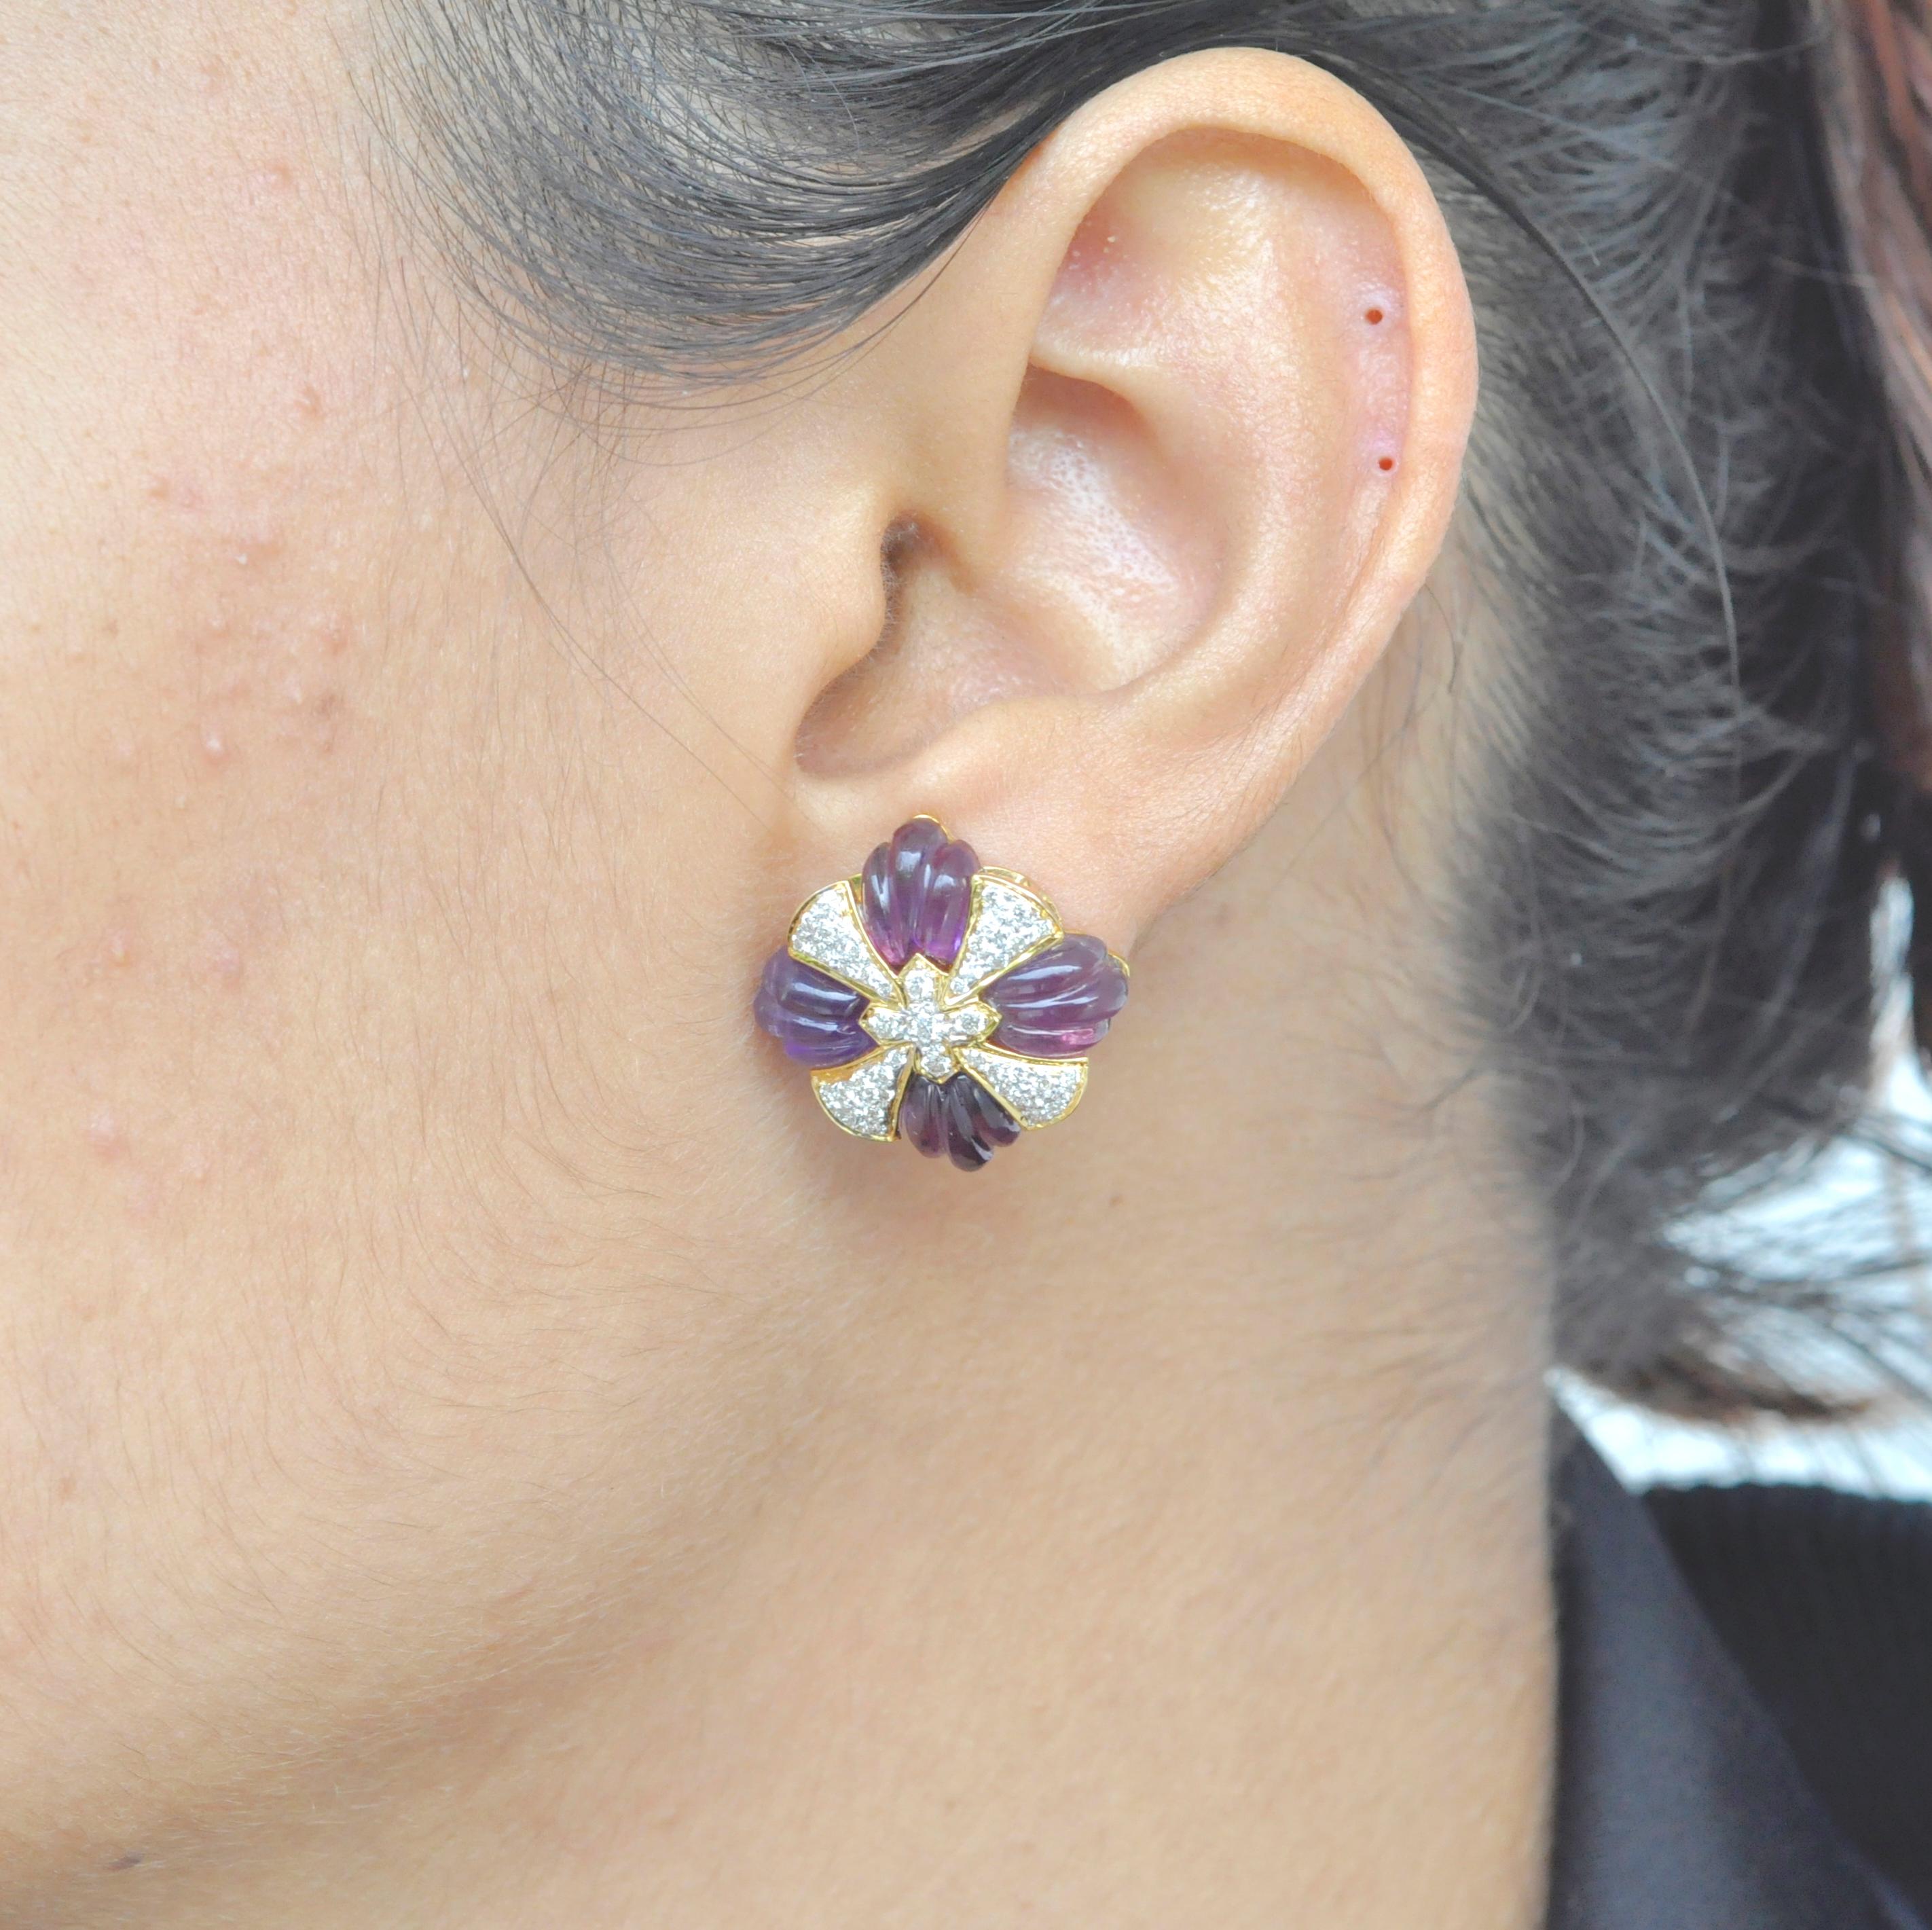 A beautiful classic yet unique amethyst carving stud earrings is a chic piece to have in your jewelry closet. The earrings uses 18 Karat yellow gold with diamonds and amethyst carving precisely set in the shape of a wheel complimented by pave set